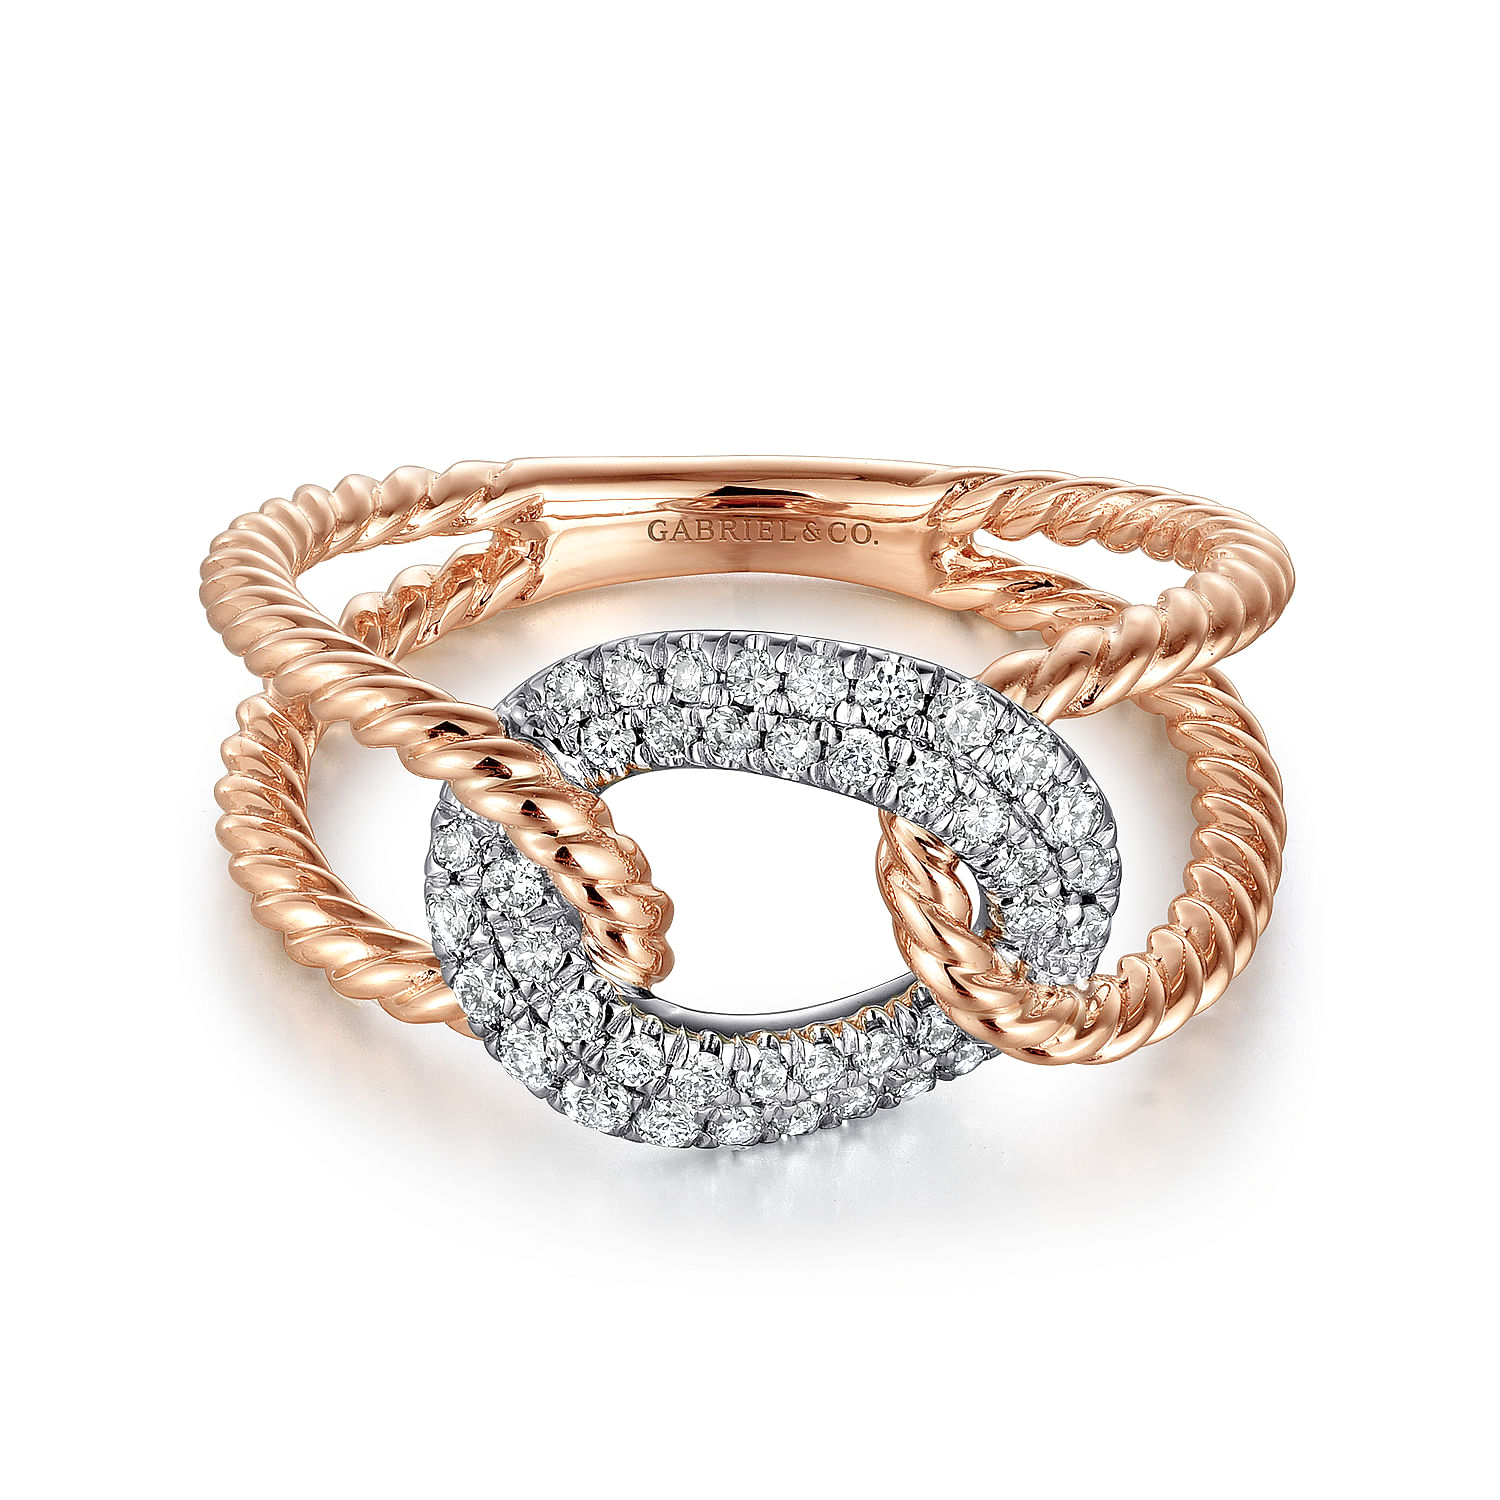 14K White and Rose Gold Twisted Rope Link Ring with Diamond Pavé Station